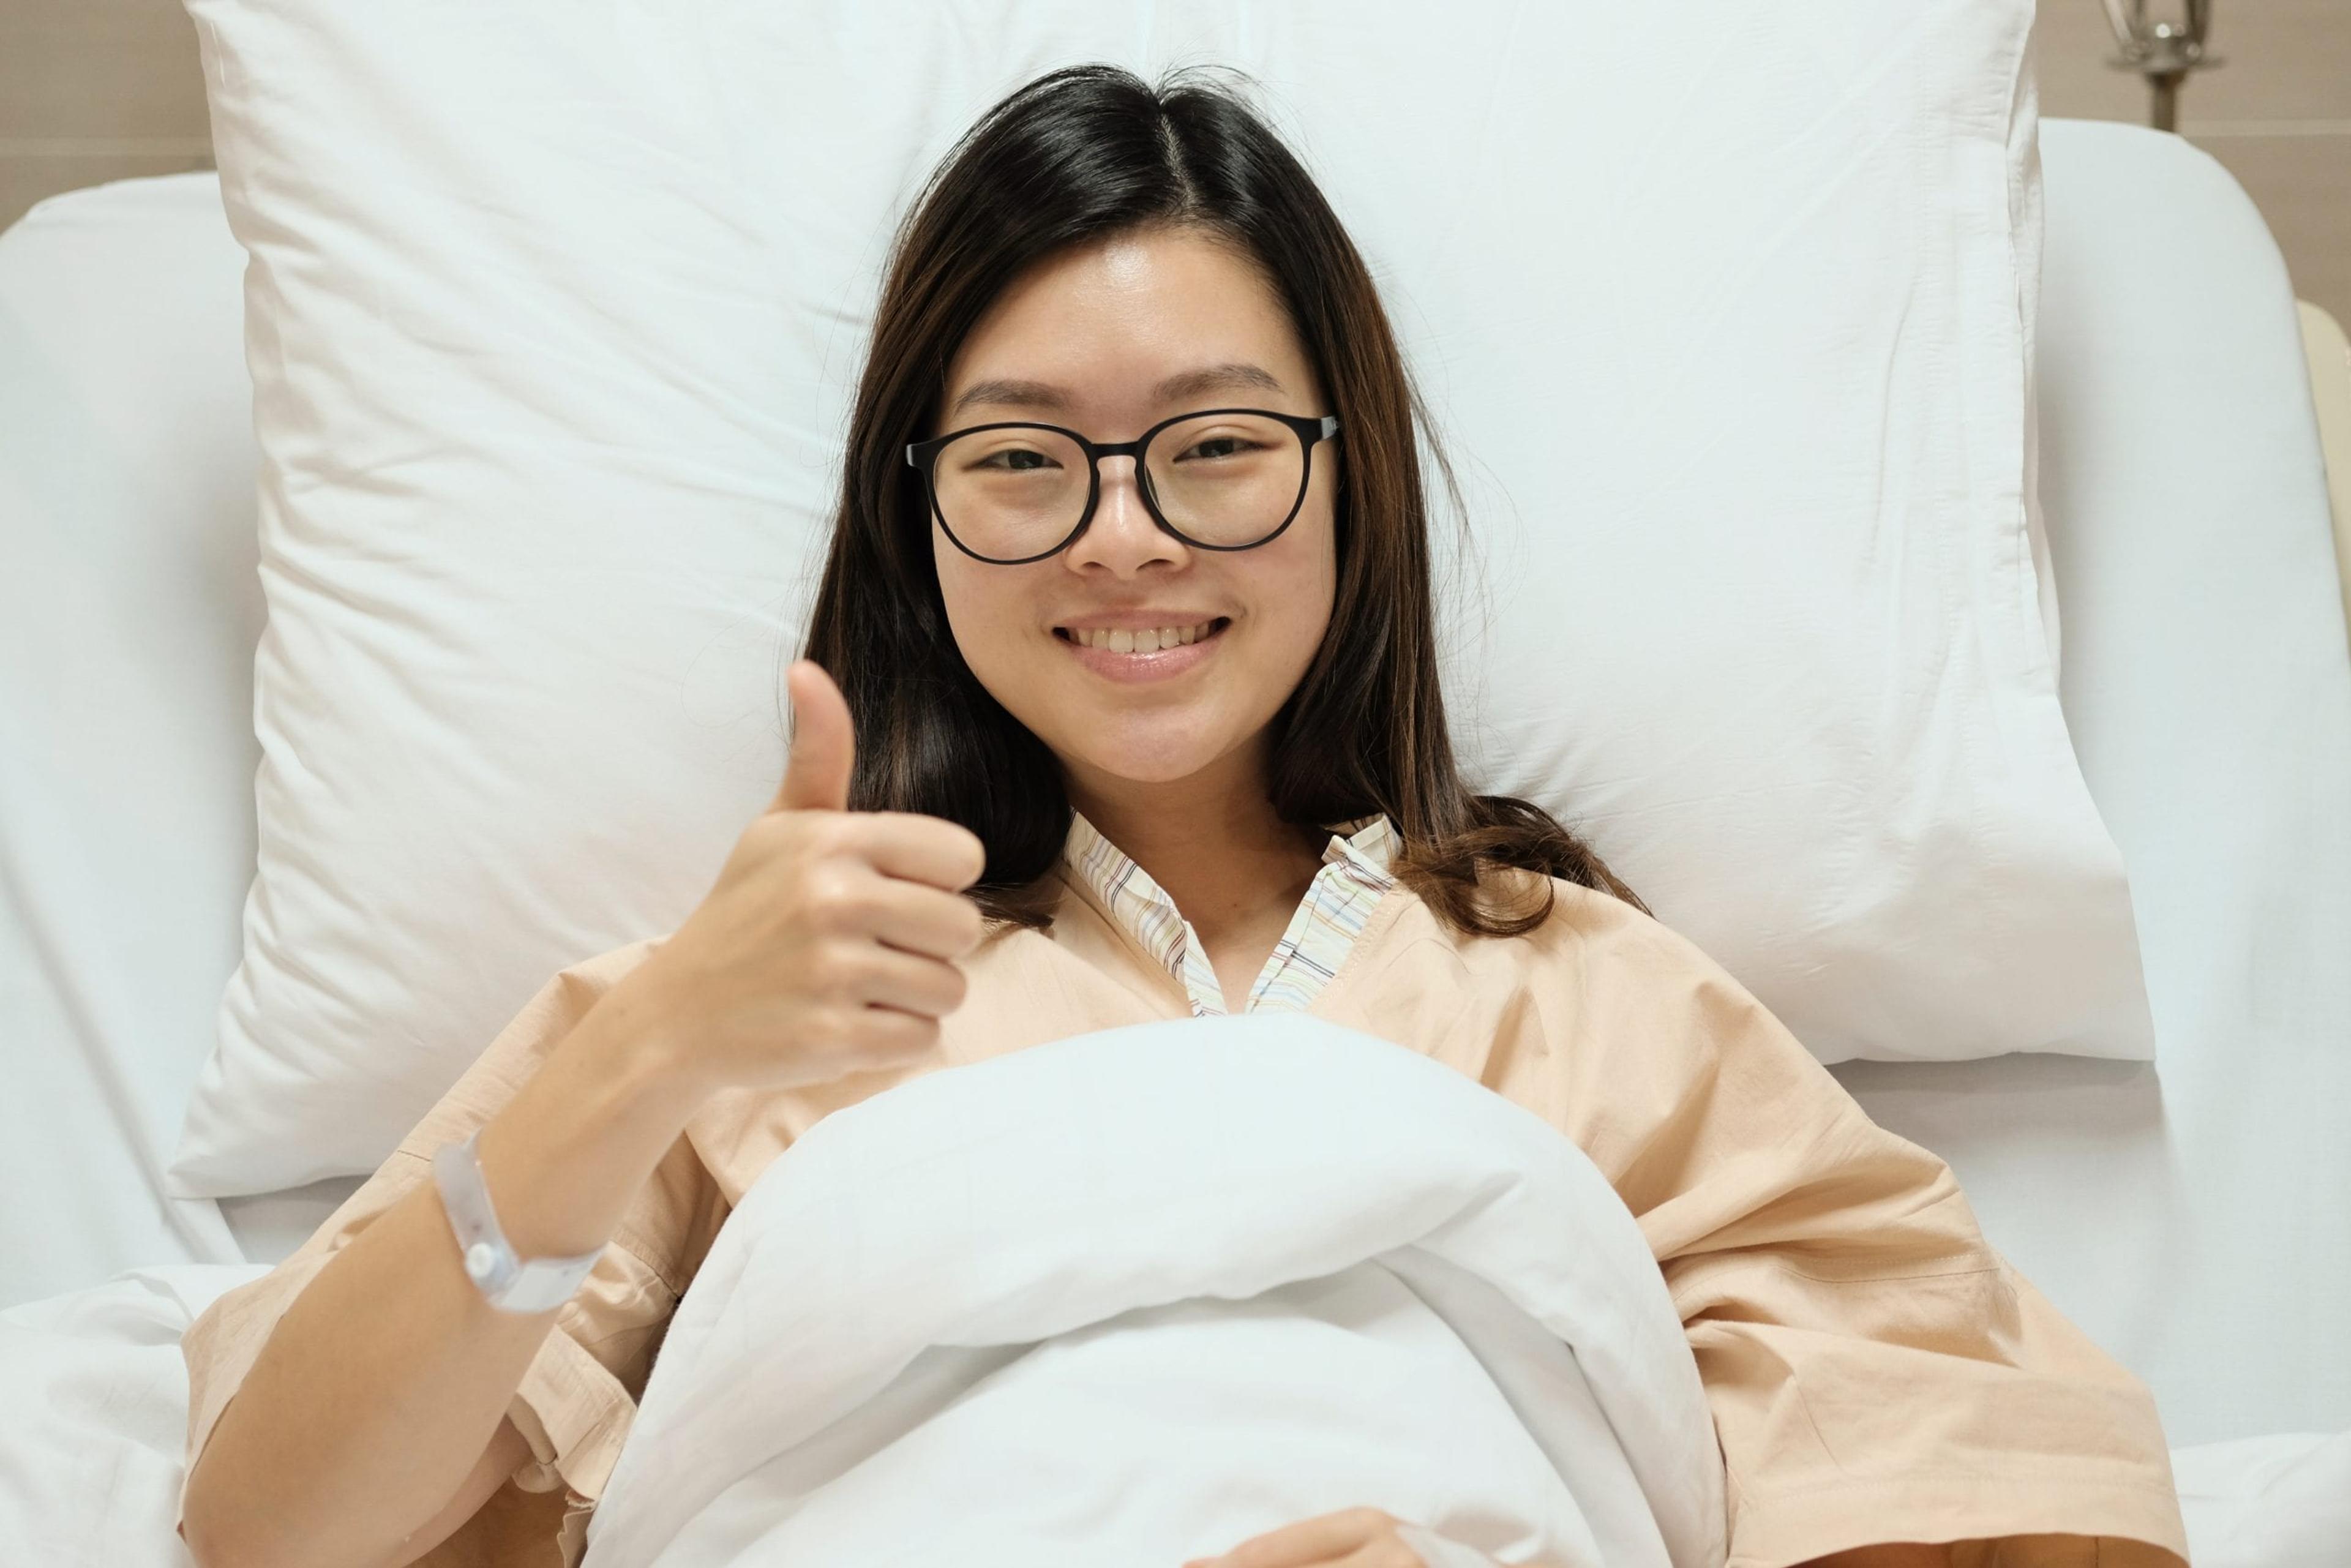 Image of a patient in a hospital bed giving a thumbs up.